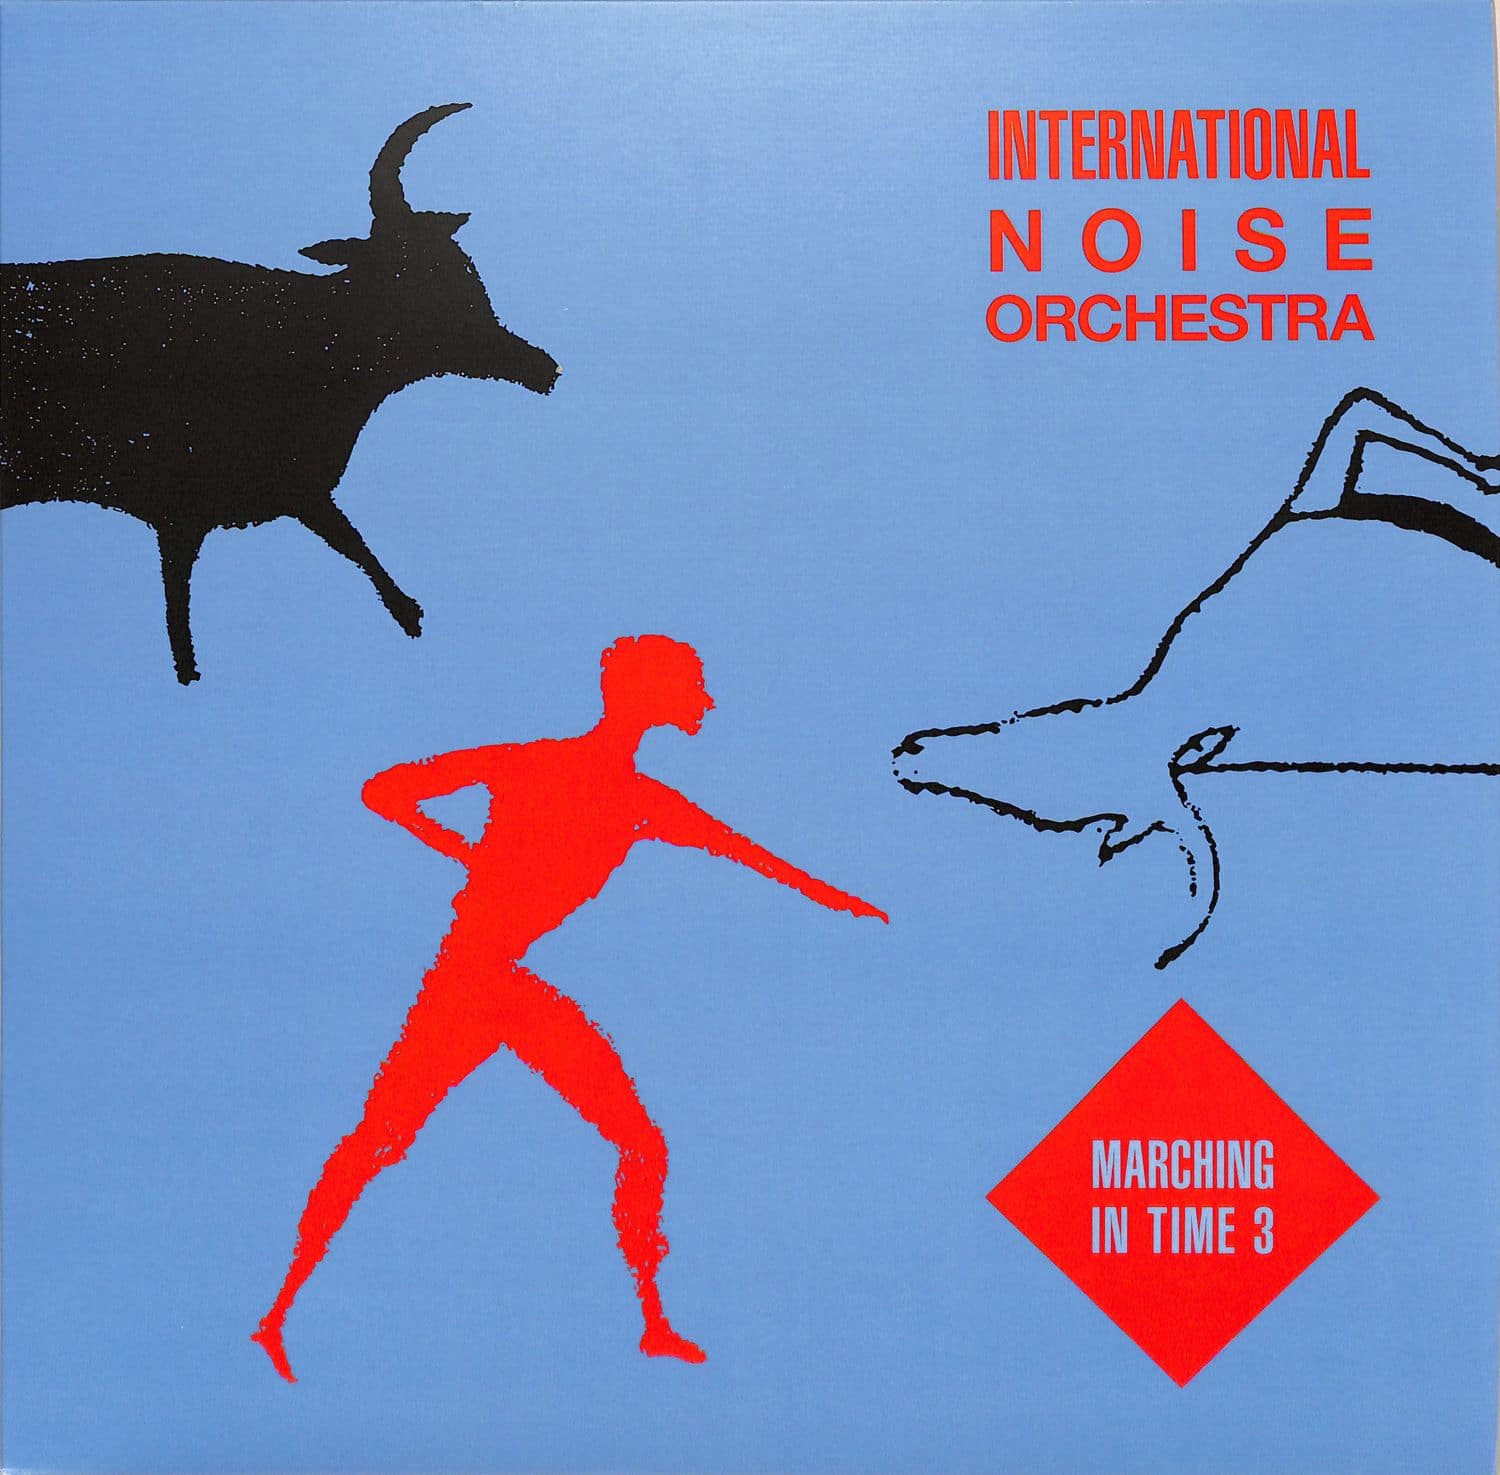 International Noise Orchestra - MARCHING IN TIME 3 